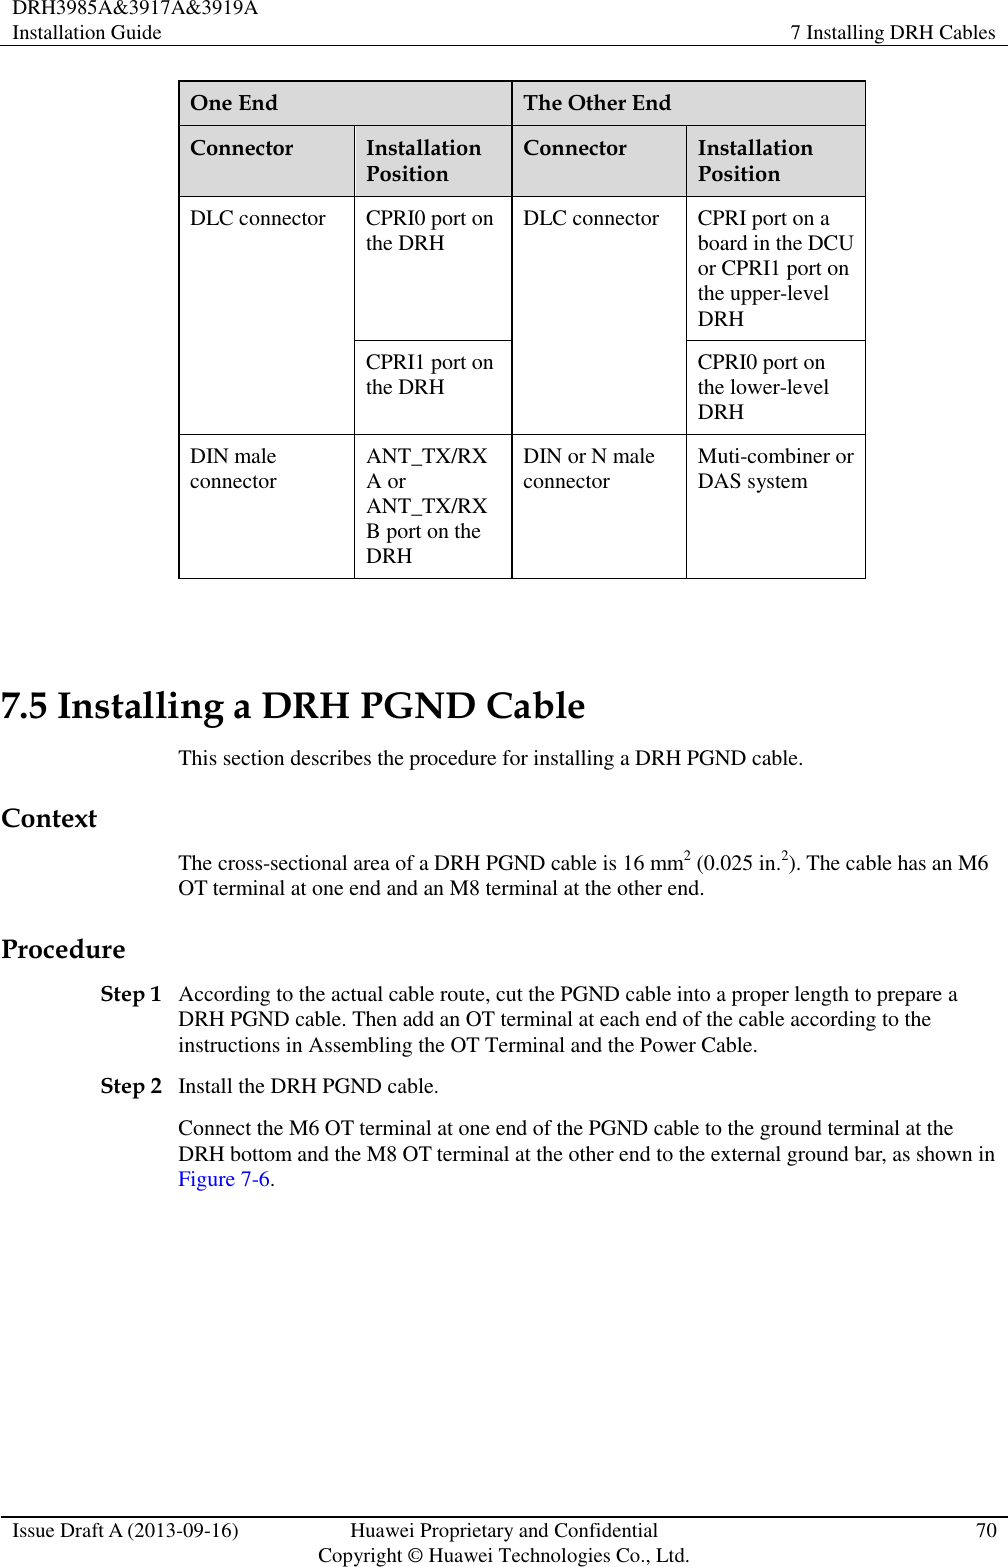 DRH3985A&amp;3917A&amp;3919A Installation Guide 7 Installing DRH Cables  Issue Draft A (2013-09-16) Huawei Proprietary and Confidential                                     Copyright © Huawei Technologies Co., Ltd. 70  One End The Other End Connector Installation Position Connector Installation Position DLC connector CPRI0 port on the DRH DLC connector CPRI port on a board in the DCU or CPRI1 port on the upper-level DRH CPRI1 port on the DRH CPRI0 port on the lower-level DRH DIN male connector ANT_TX/RXA or ANT_TX/RXB port on the DRH DIN or N male connector Muti-combiner or DAS system  7.5 Installing a DRH PGND Cable This section describes the procedure for installing a DRH PGND cable. Context The cross-sectional area of a DRH PGND cable is 16 mm2 (0.025 in.2). The cable has an M6 OT terminal at one end and an M8 terminal at the other end. Procedure Step 1 According to the actual cable route, cut the PGND cable into a proper length to prepare a DRH PGND cable. Then add an OT terminal at each end of the cable according to the instructions in Assembling the OT Terminal and the Power Cable. Step 2 Install the DRH PGND cable. Connect the M6 OT terminal at one end of the PGND cable to the ground terminal at the DRH bottom and the M8 OT terminal at the other end to the external ground bar, as shown in Figure 7-6.   